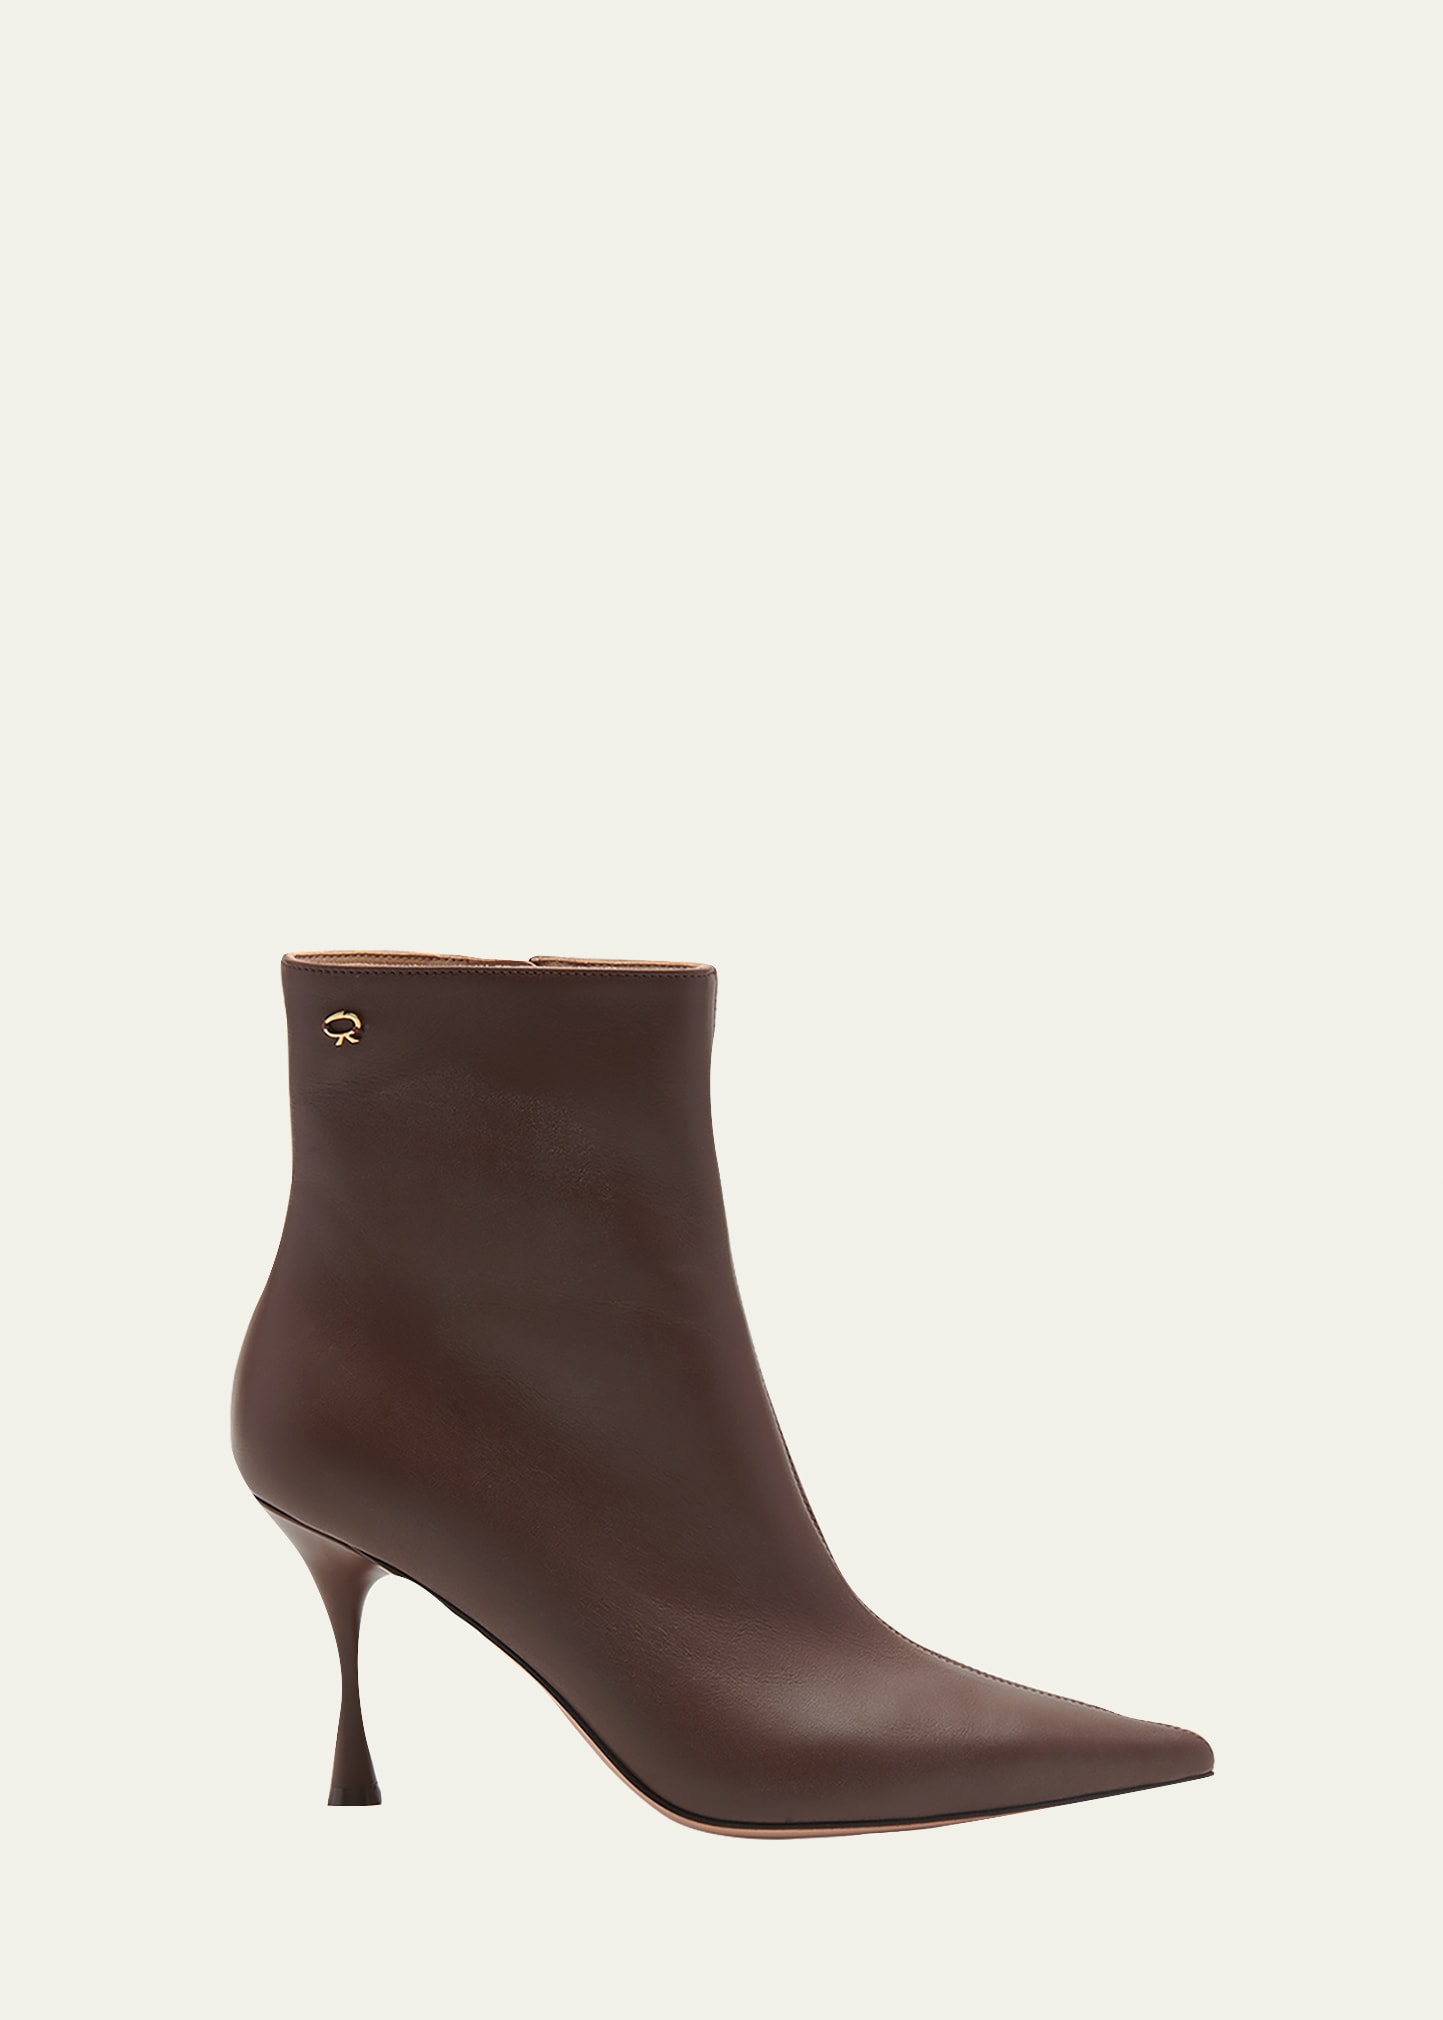 Gianvito Rossi Leather Stiletto Ankle Boots In Brown